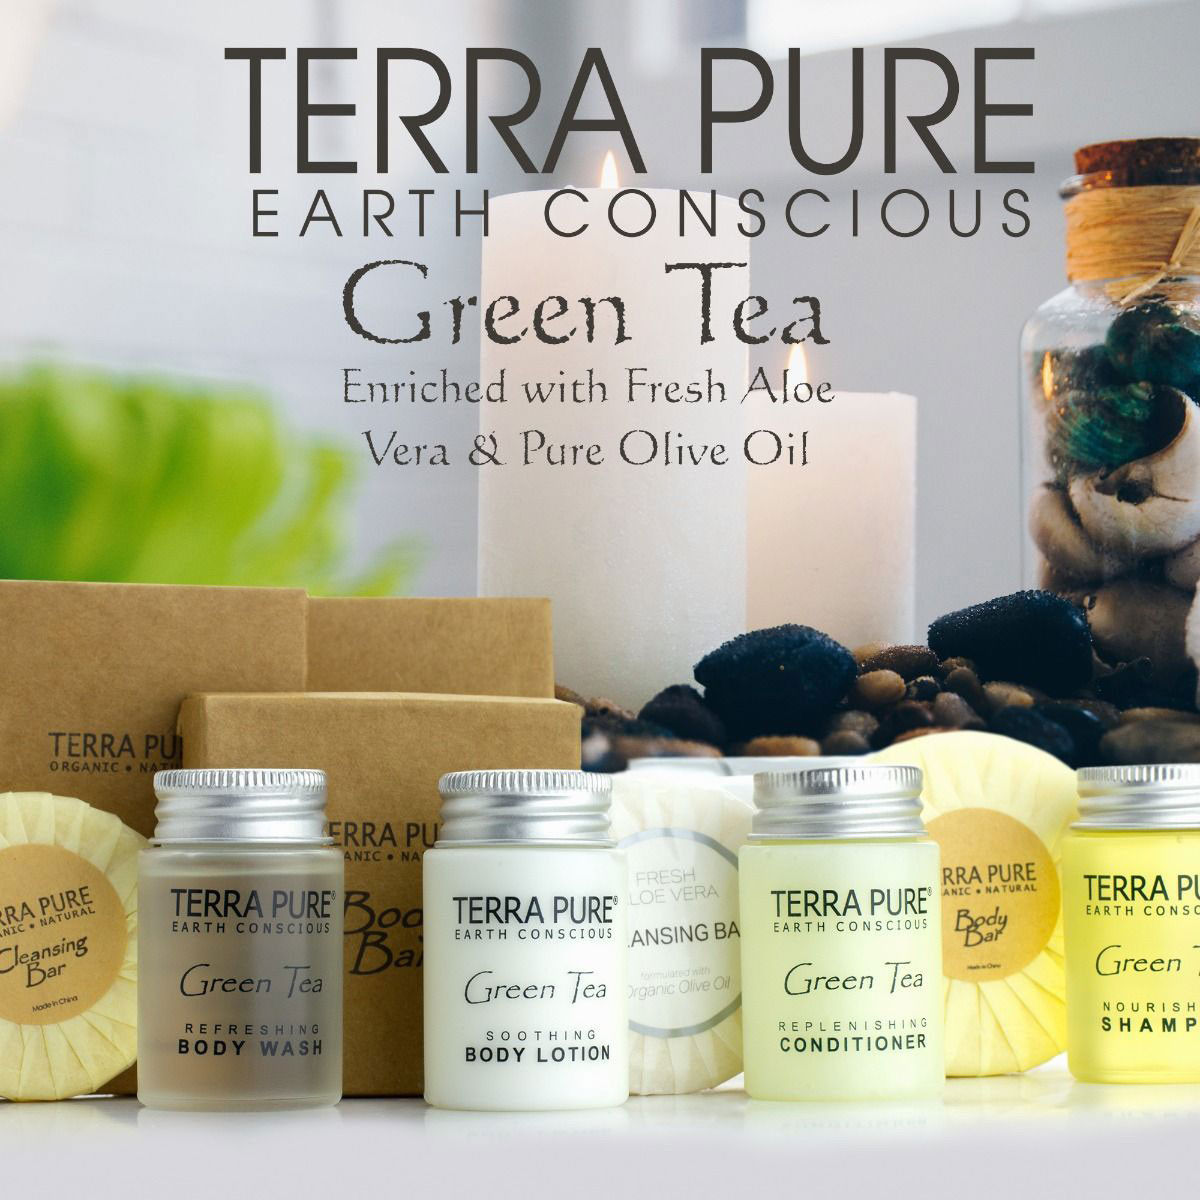 Which terra pure ingredients are infused in the TERRA PURE GREEN TEA Collection?